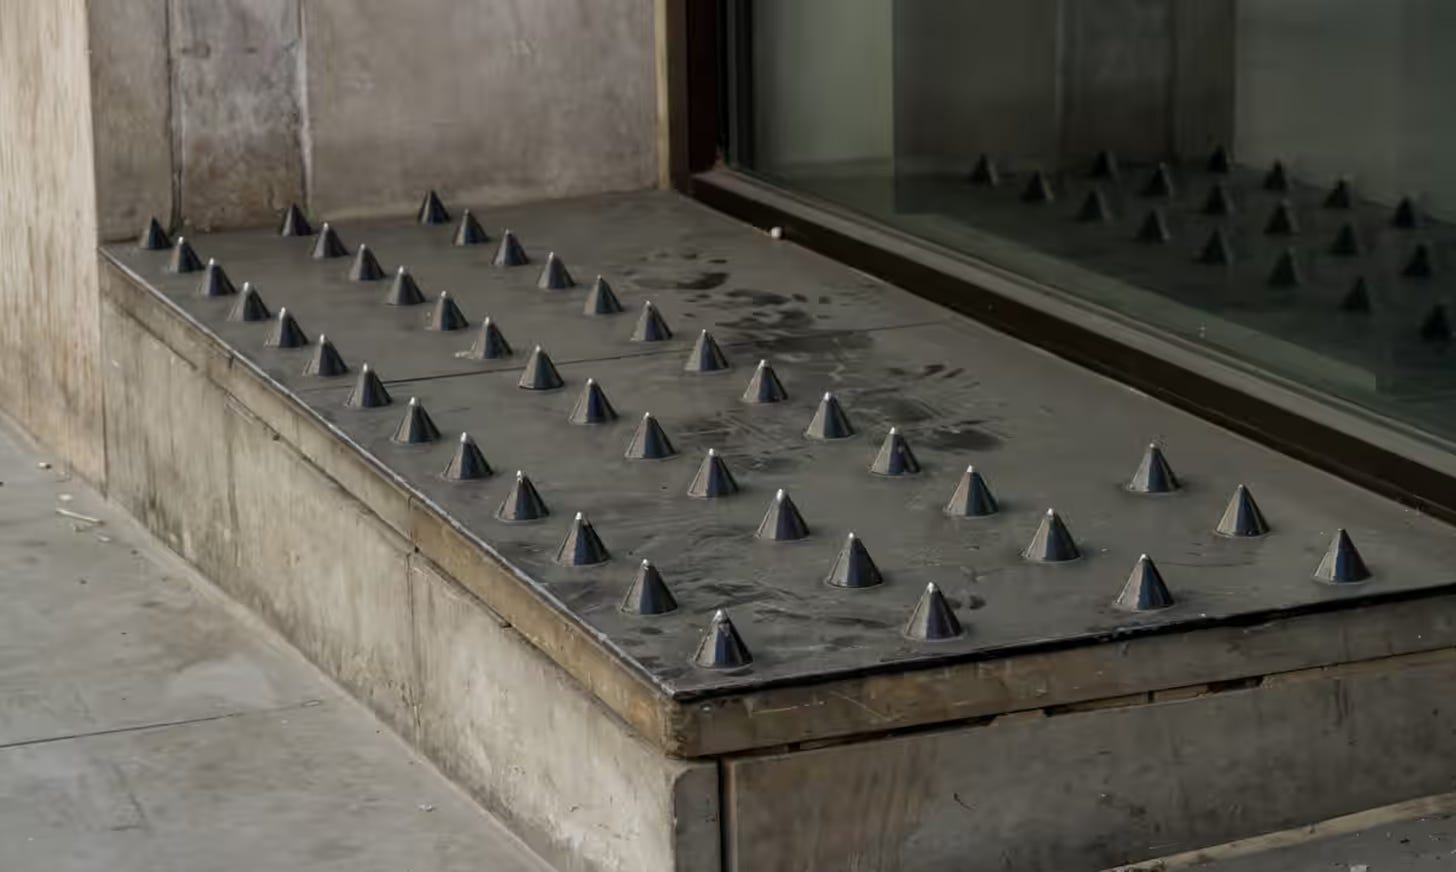 Photo of a level area on the street in front of a building that has many menacing spikes added to the surface to keep people from being able to sit or sleep on it.